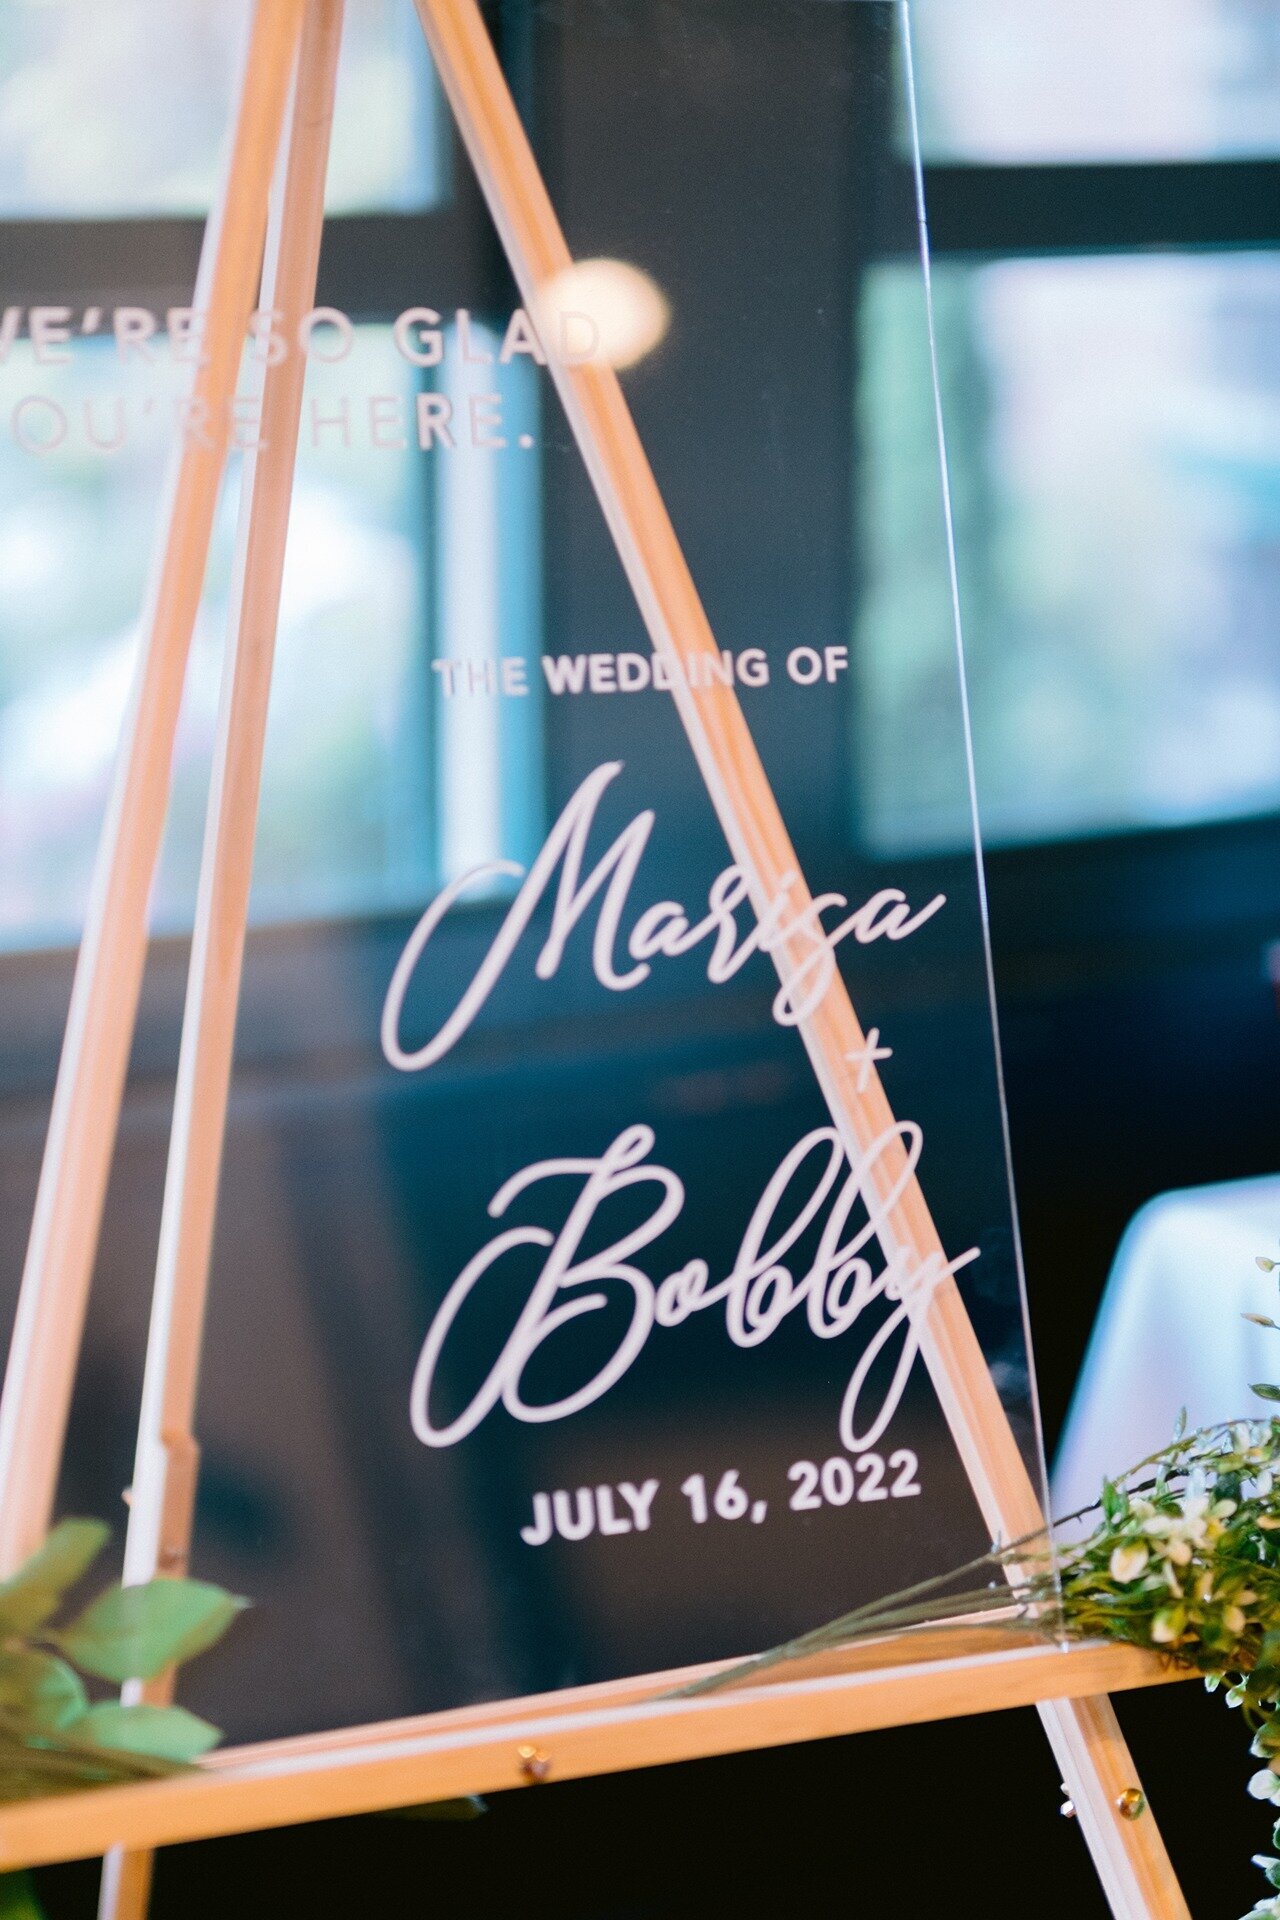 leila-james-events-newport-ri-wedding-planning-luxury-events-marisa-and-bobby-la-forge-newport-welcome-party-melissa-stimpson-photography-11